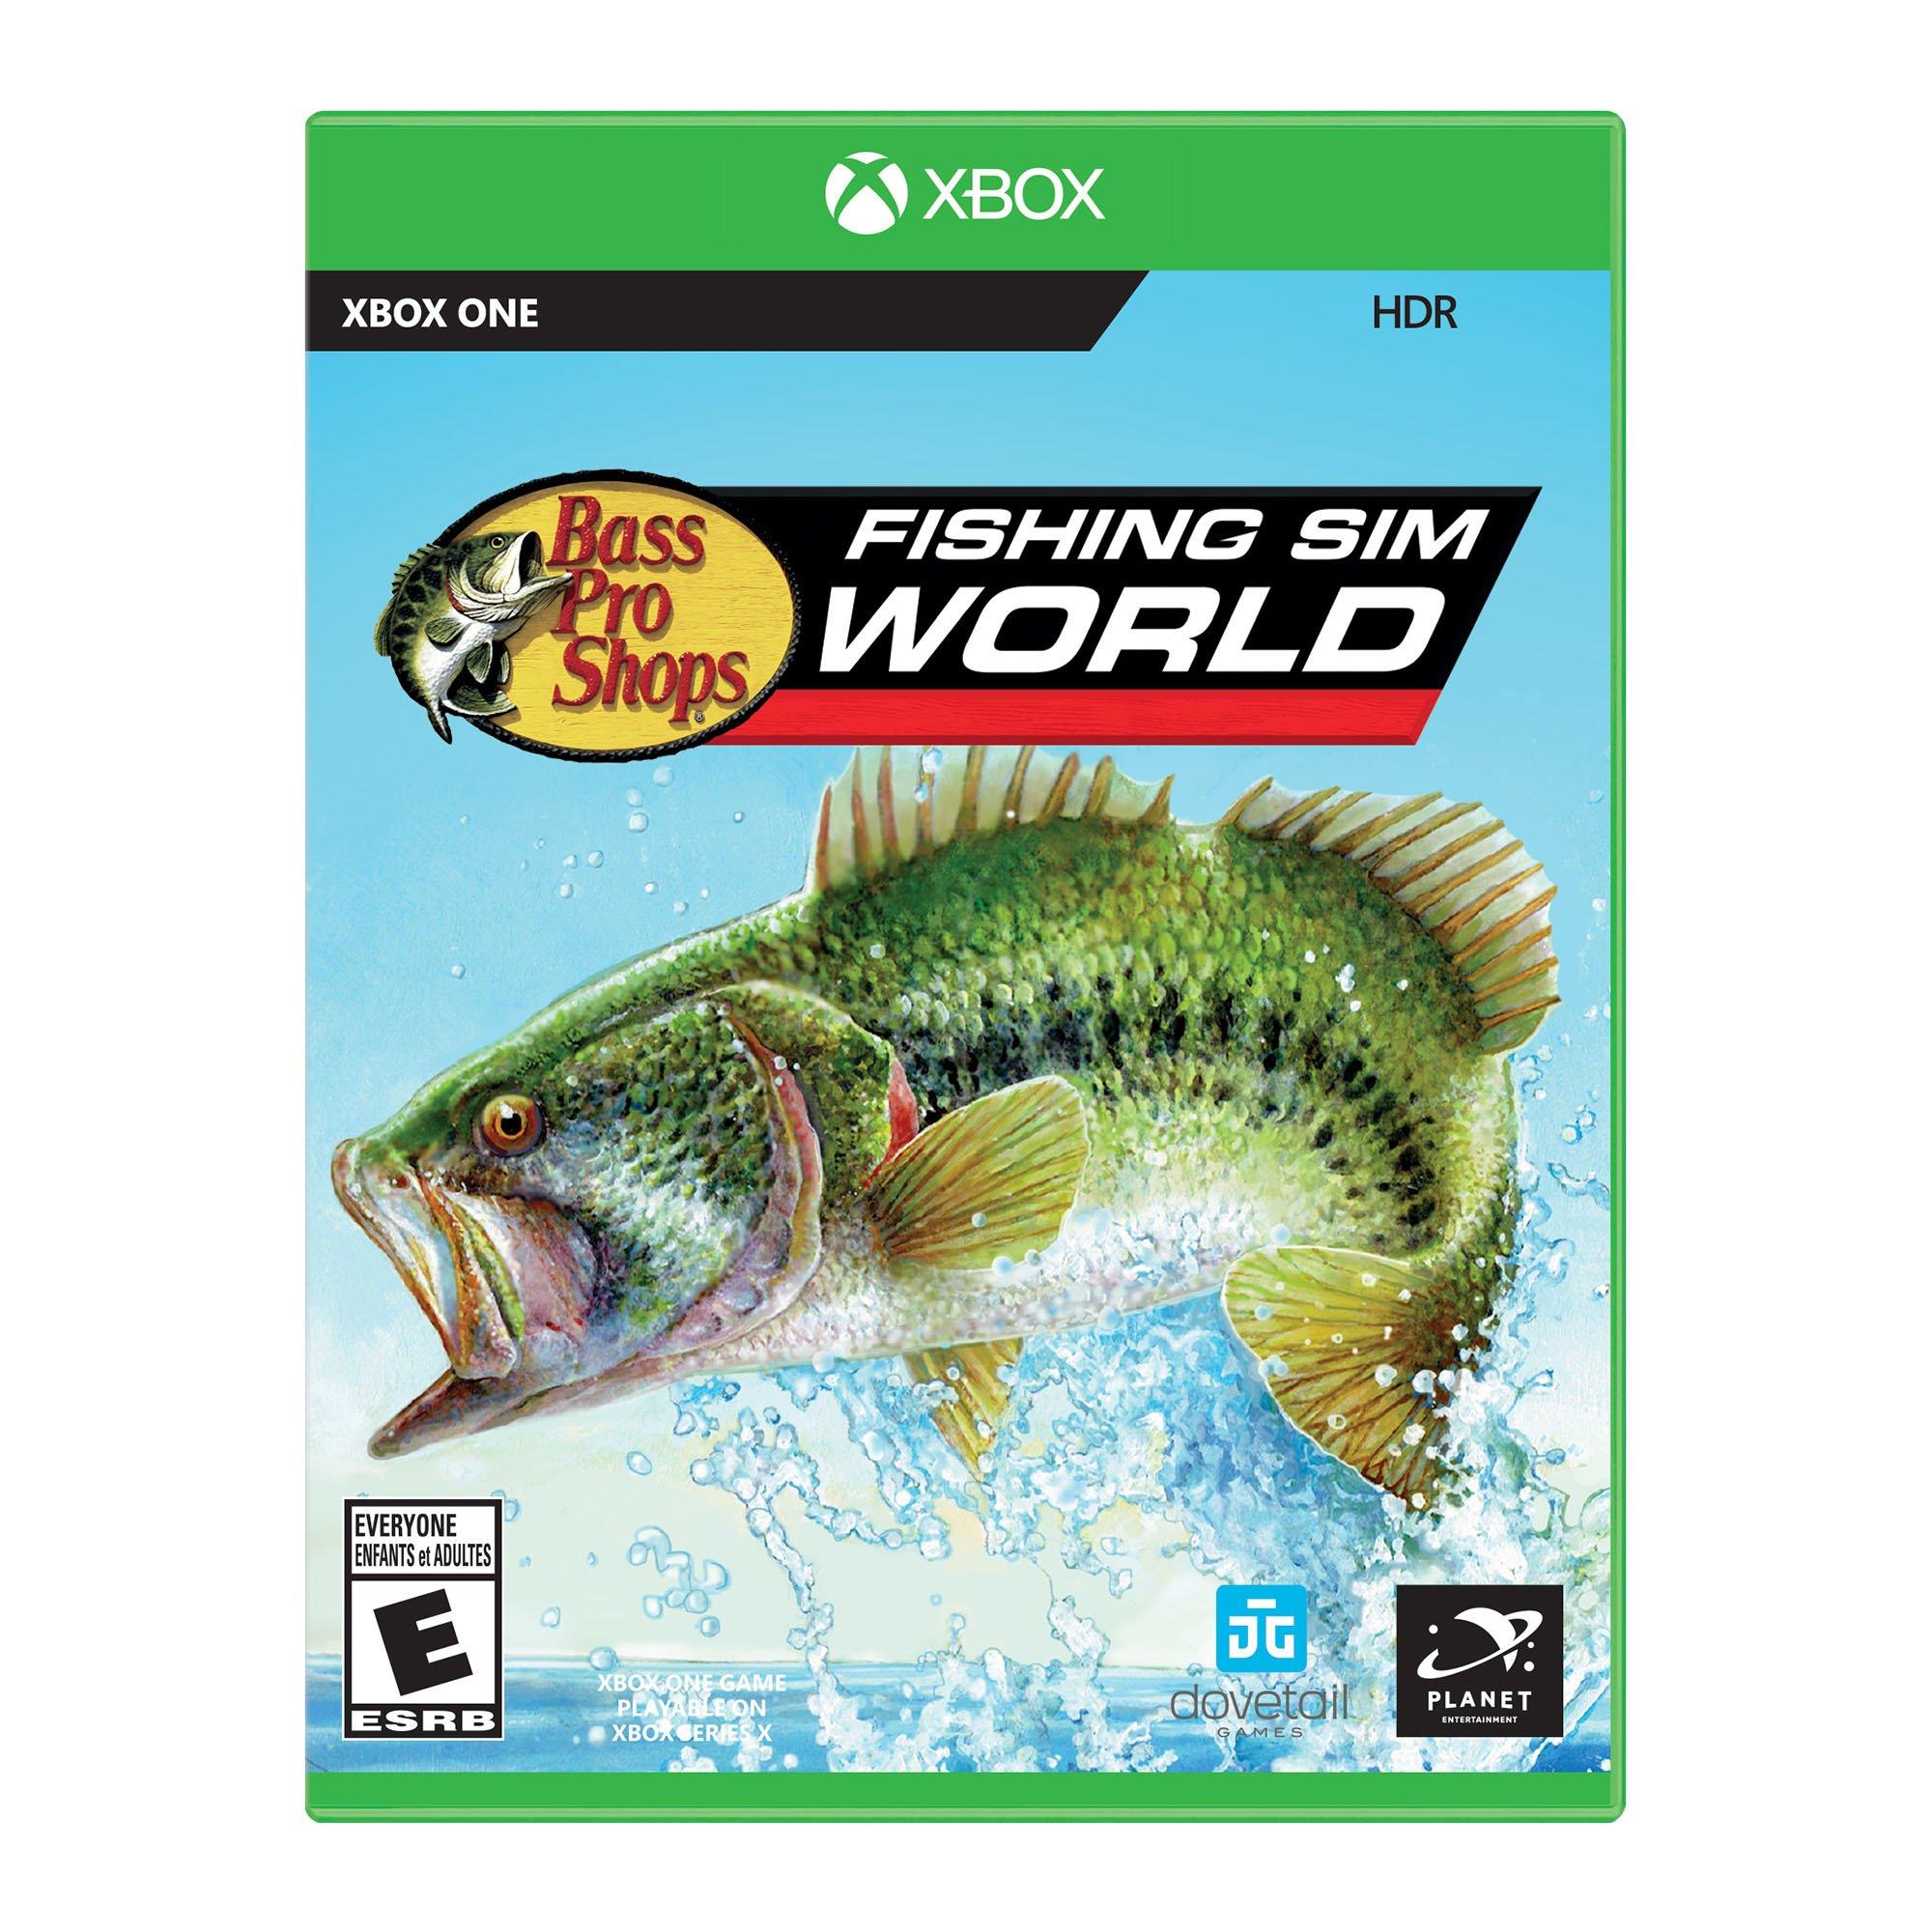 Fishing Sim World Xbox One review: Great fishing fun with average